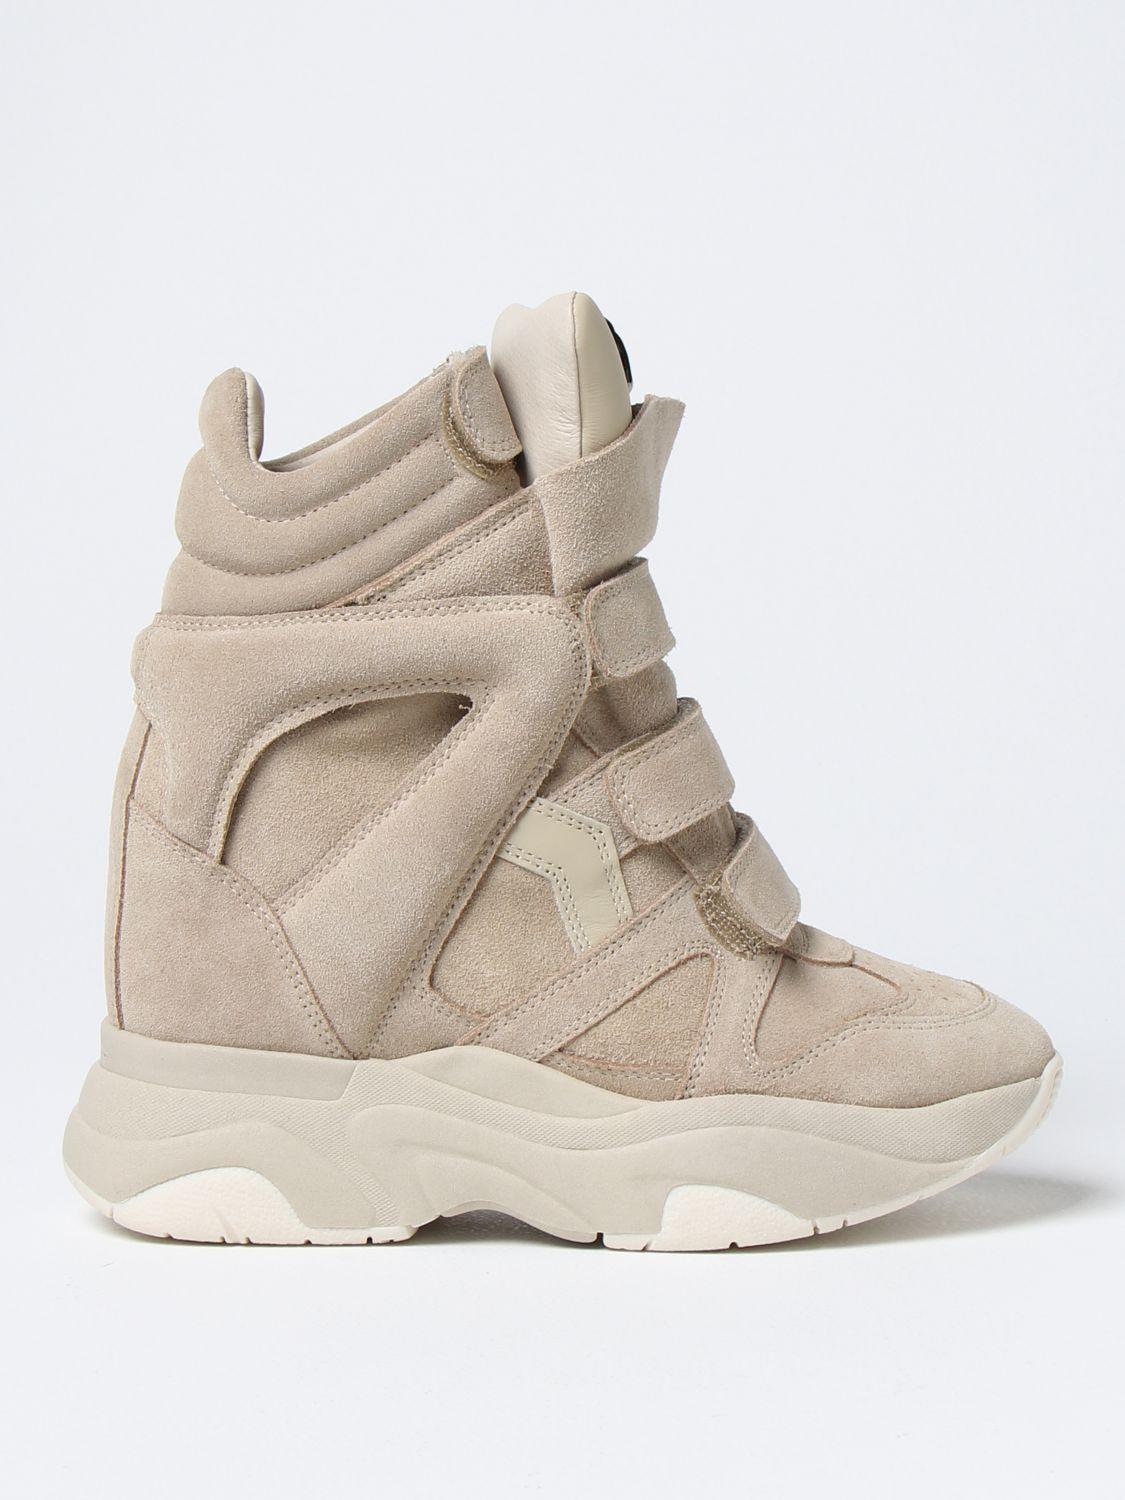 Isabel Marant Sneakers in Natural | Lyst